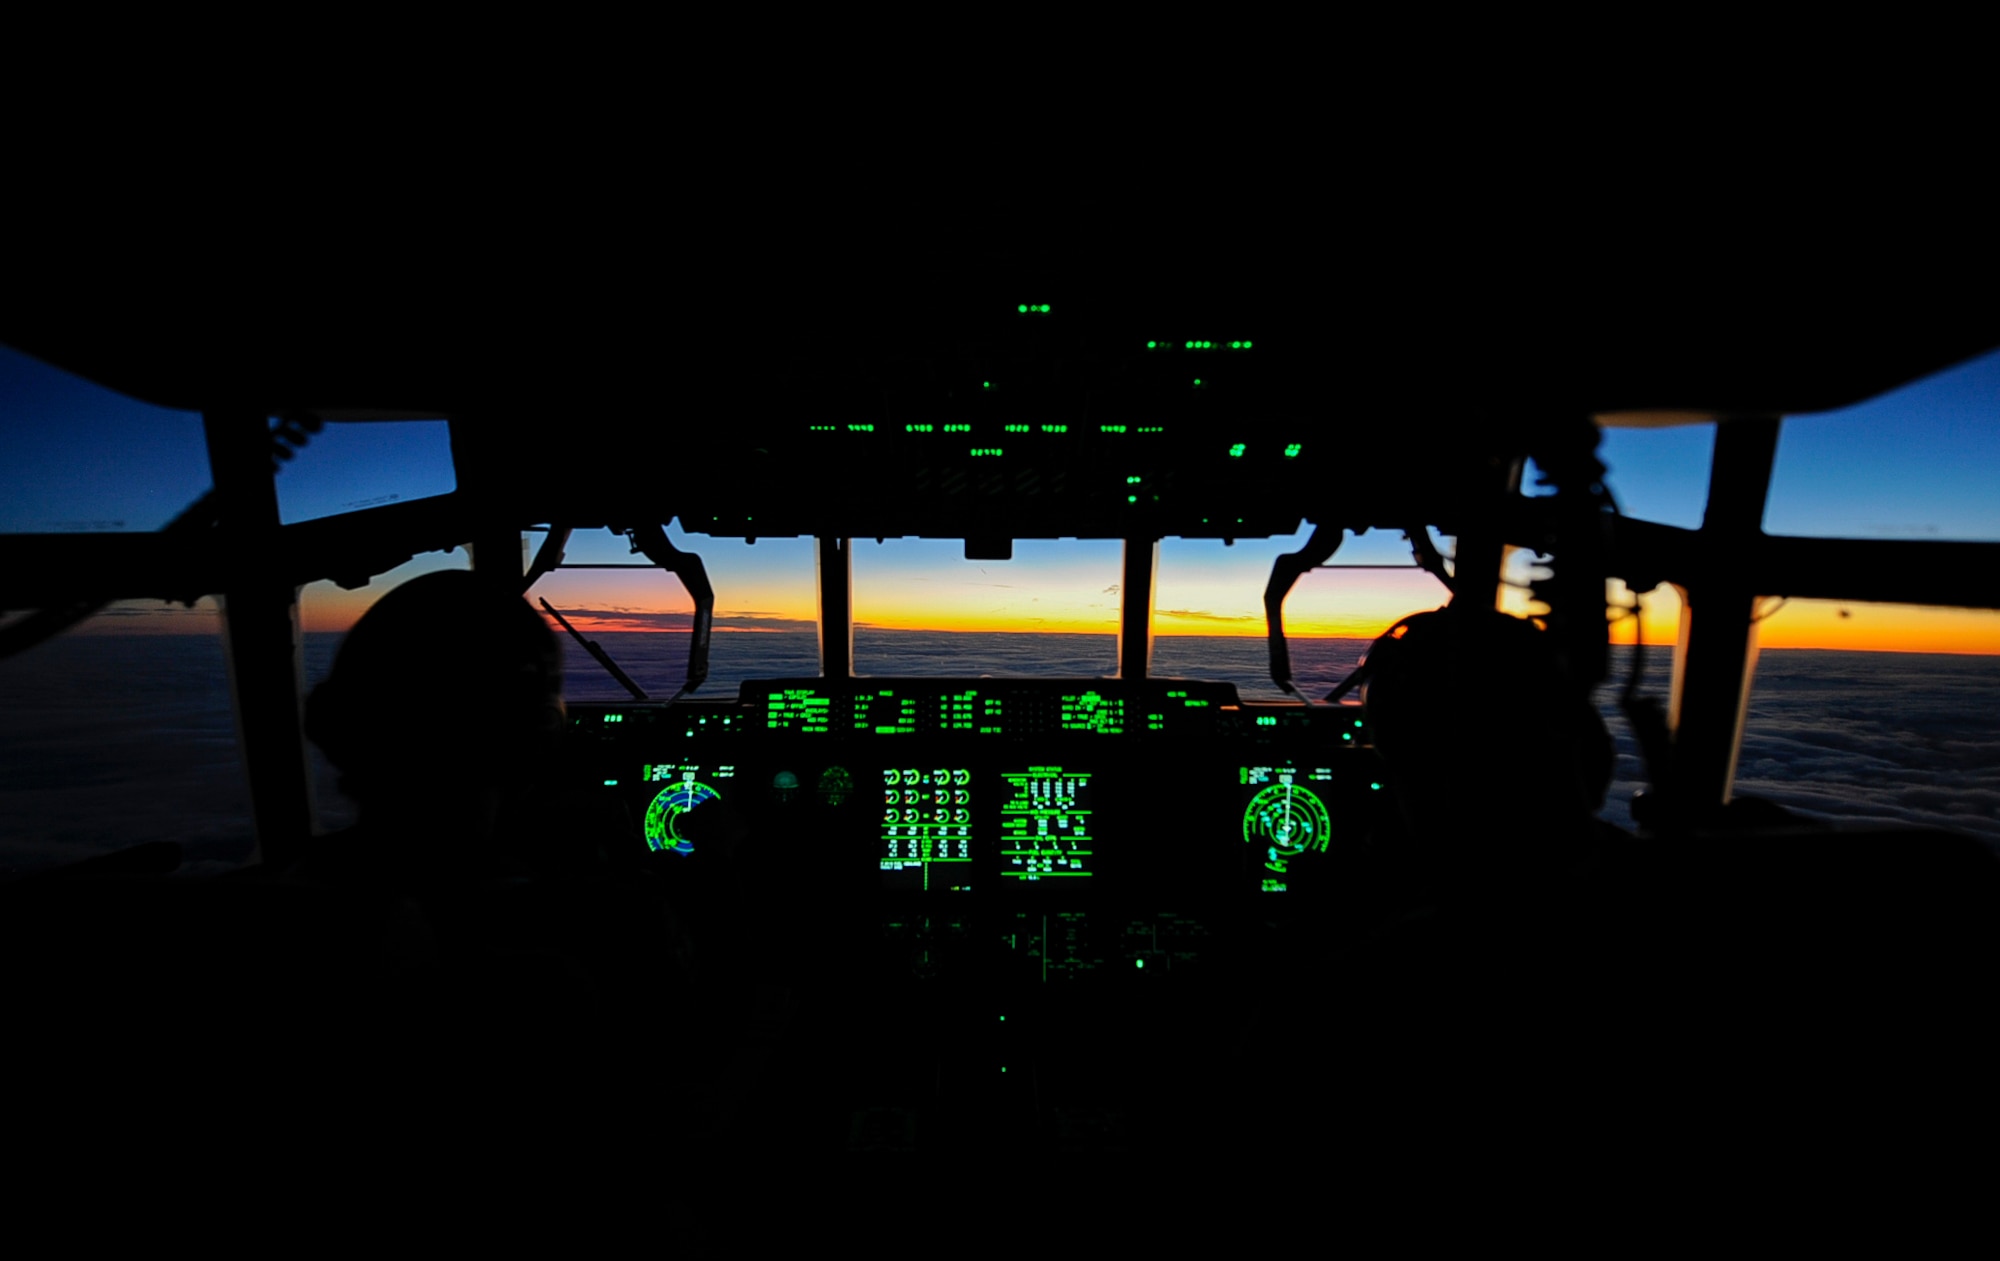 U.S. Air Force 1st Lt. Melinda Marlow (left), and Maj. Kyle Bucher (right), 37th Airlift Squadron C-130J Super Hercules pilots, fly a C-130J over Shannon, Ireland, during the sunrise Dec. 4, 2017. A crew assigned to the 37th Airlift Squadron crossed the Atlantic Ocean to retrieve a brand new C-130J Super Hercules from the Lockheed Martin Aeronautics Company production facility, in Marietta, Georgia, Nov. 29. (U.S. Air Force photo by Airman 1st Class Savannah L. Waters)